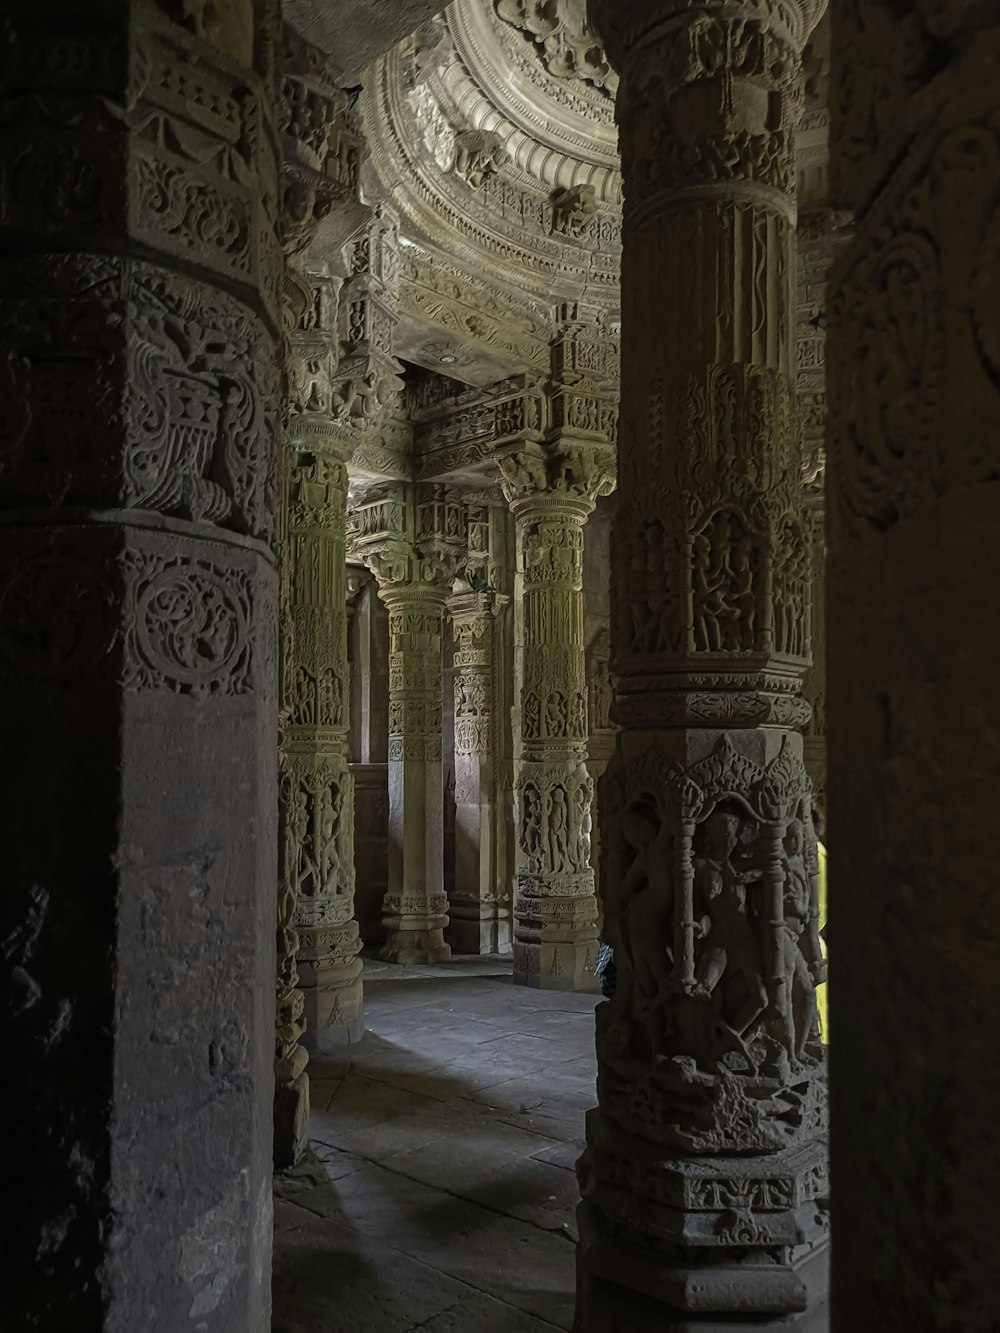 the interior of a building with columns and carvings